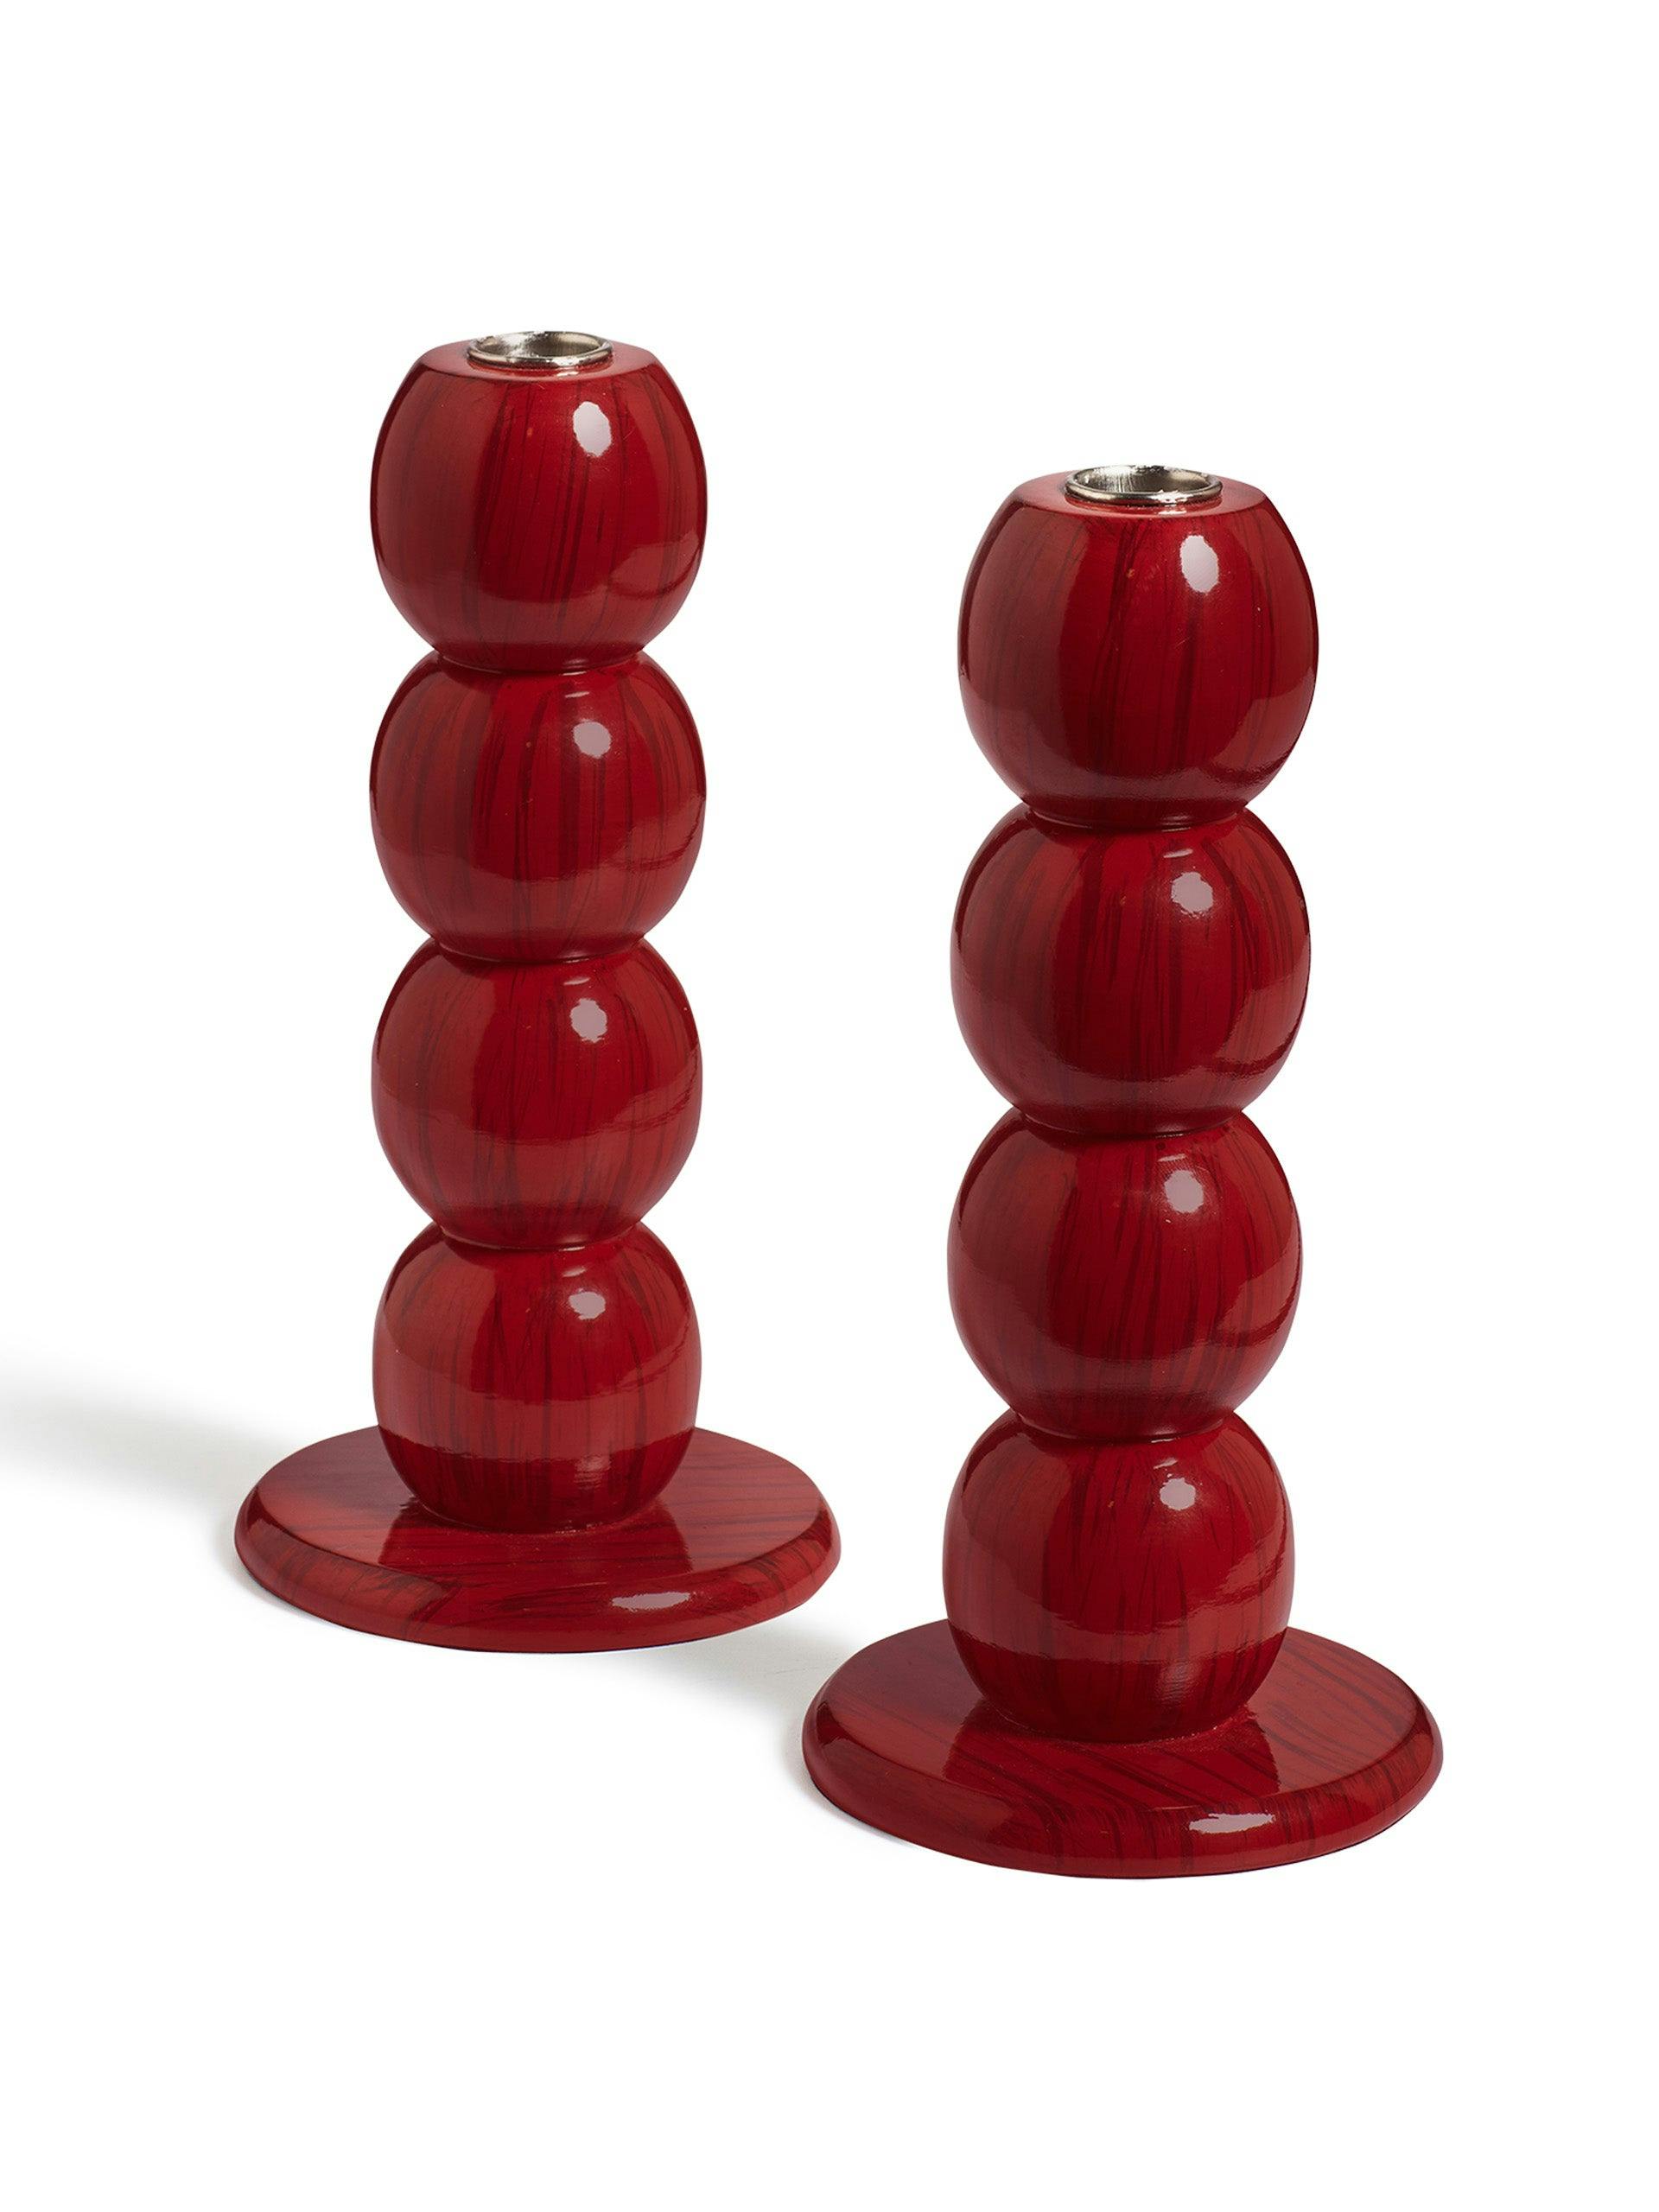 Bobina Bobble candle holders in Chinese Red (set of 2)